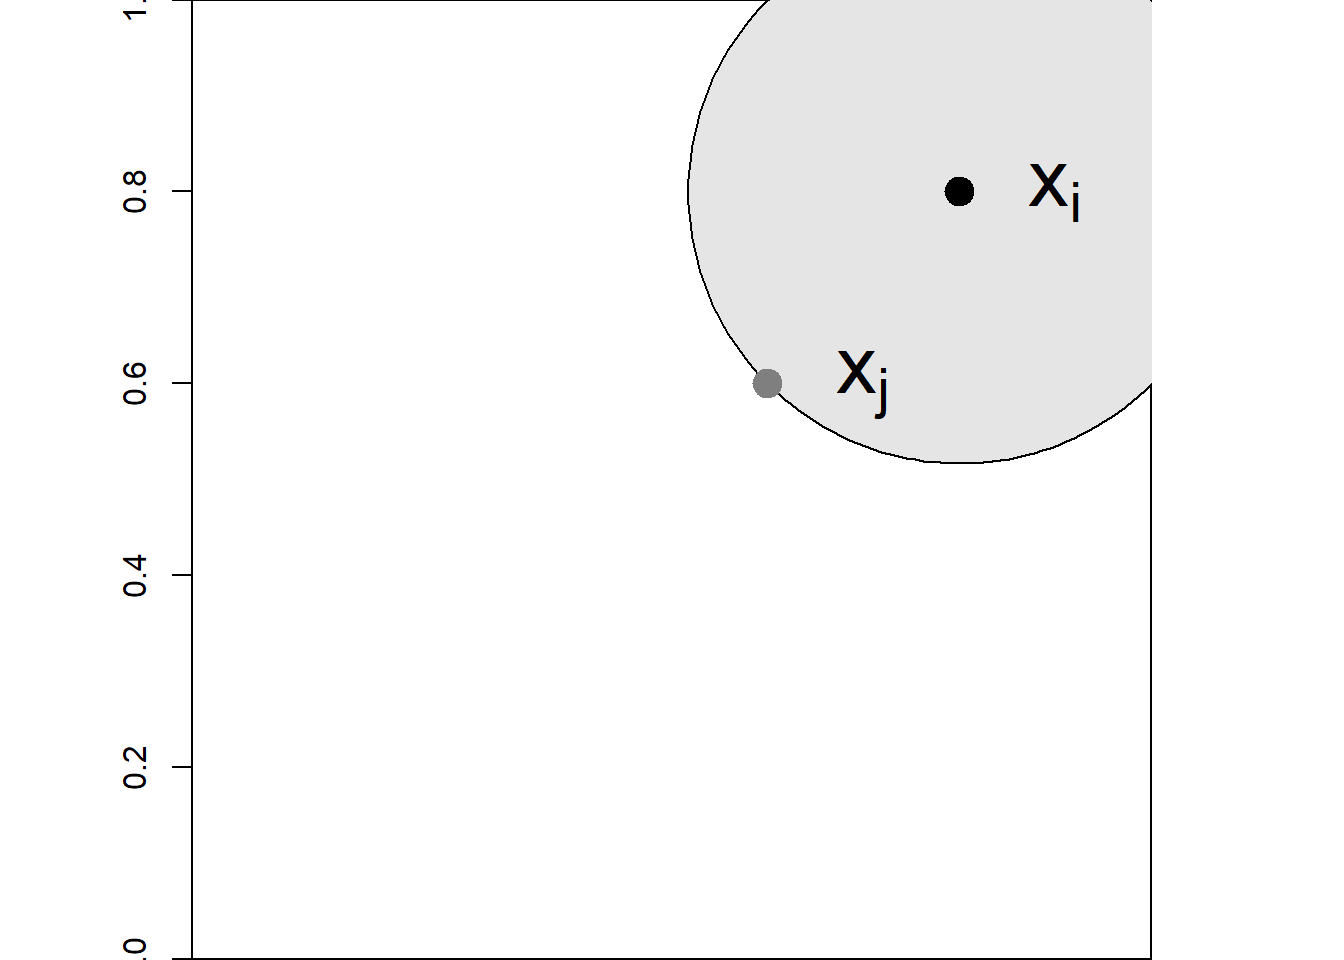 Left: Point pattern in the unit square region. The black point represents an arbitrary event. The circle encloses the events considered to estimate the K-function at the distance given by the radius of the circle. Right: Gray area represents the inverse of the weight used in the estimation of the K-function using the $x_i$ and $x_j$ events.